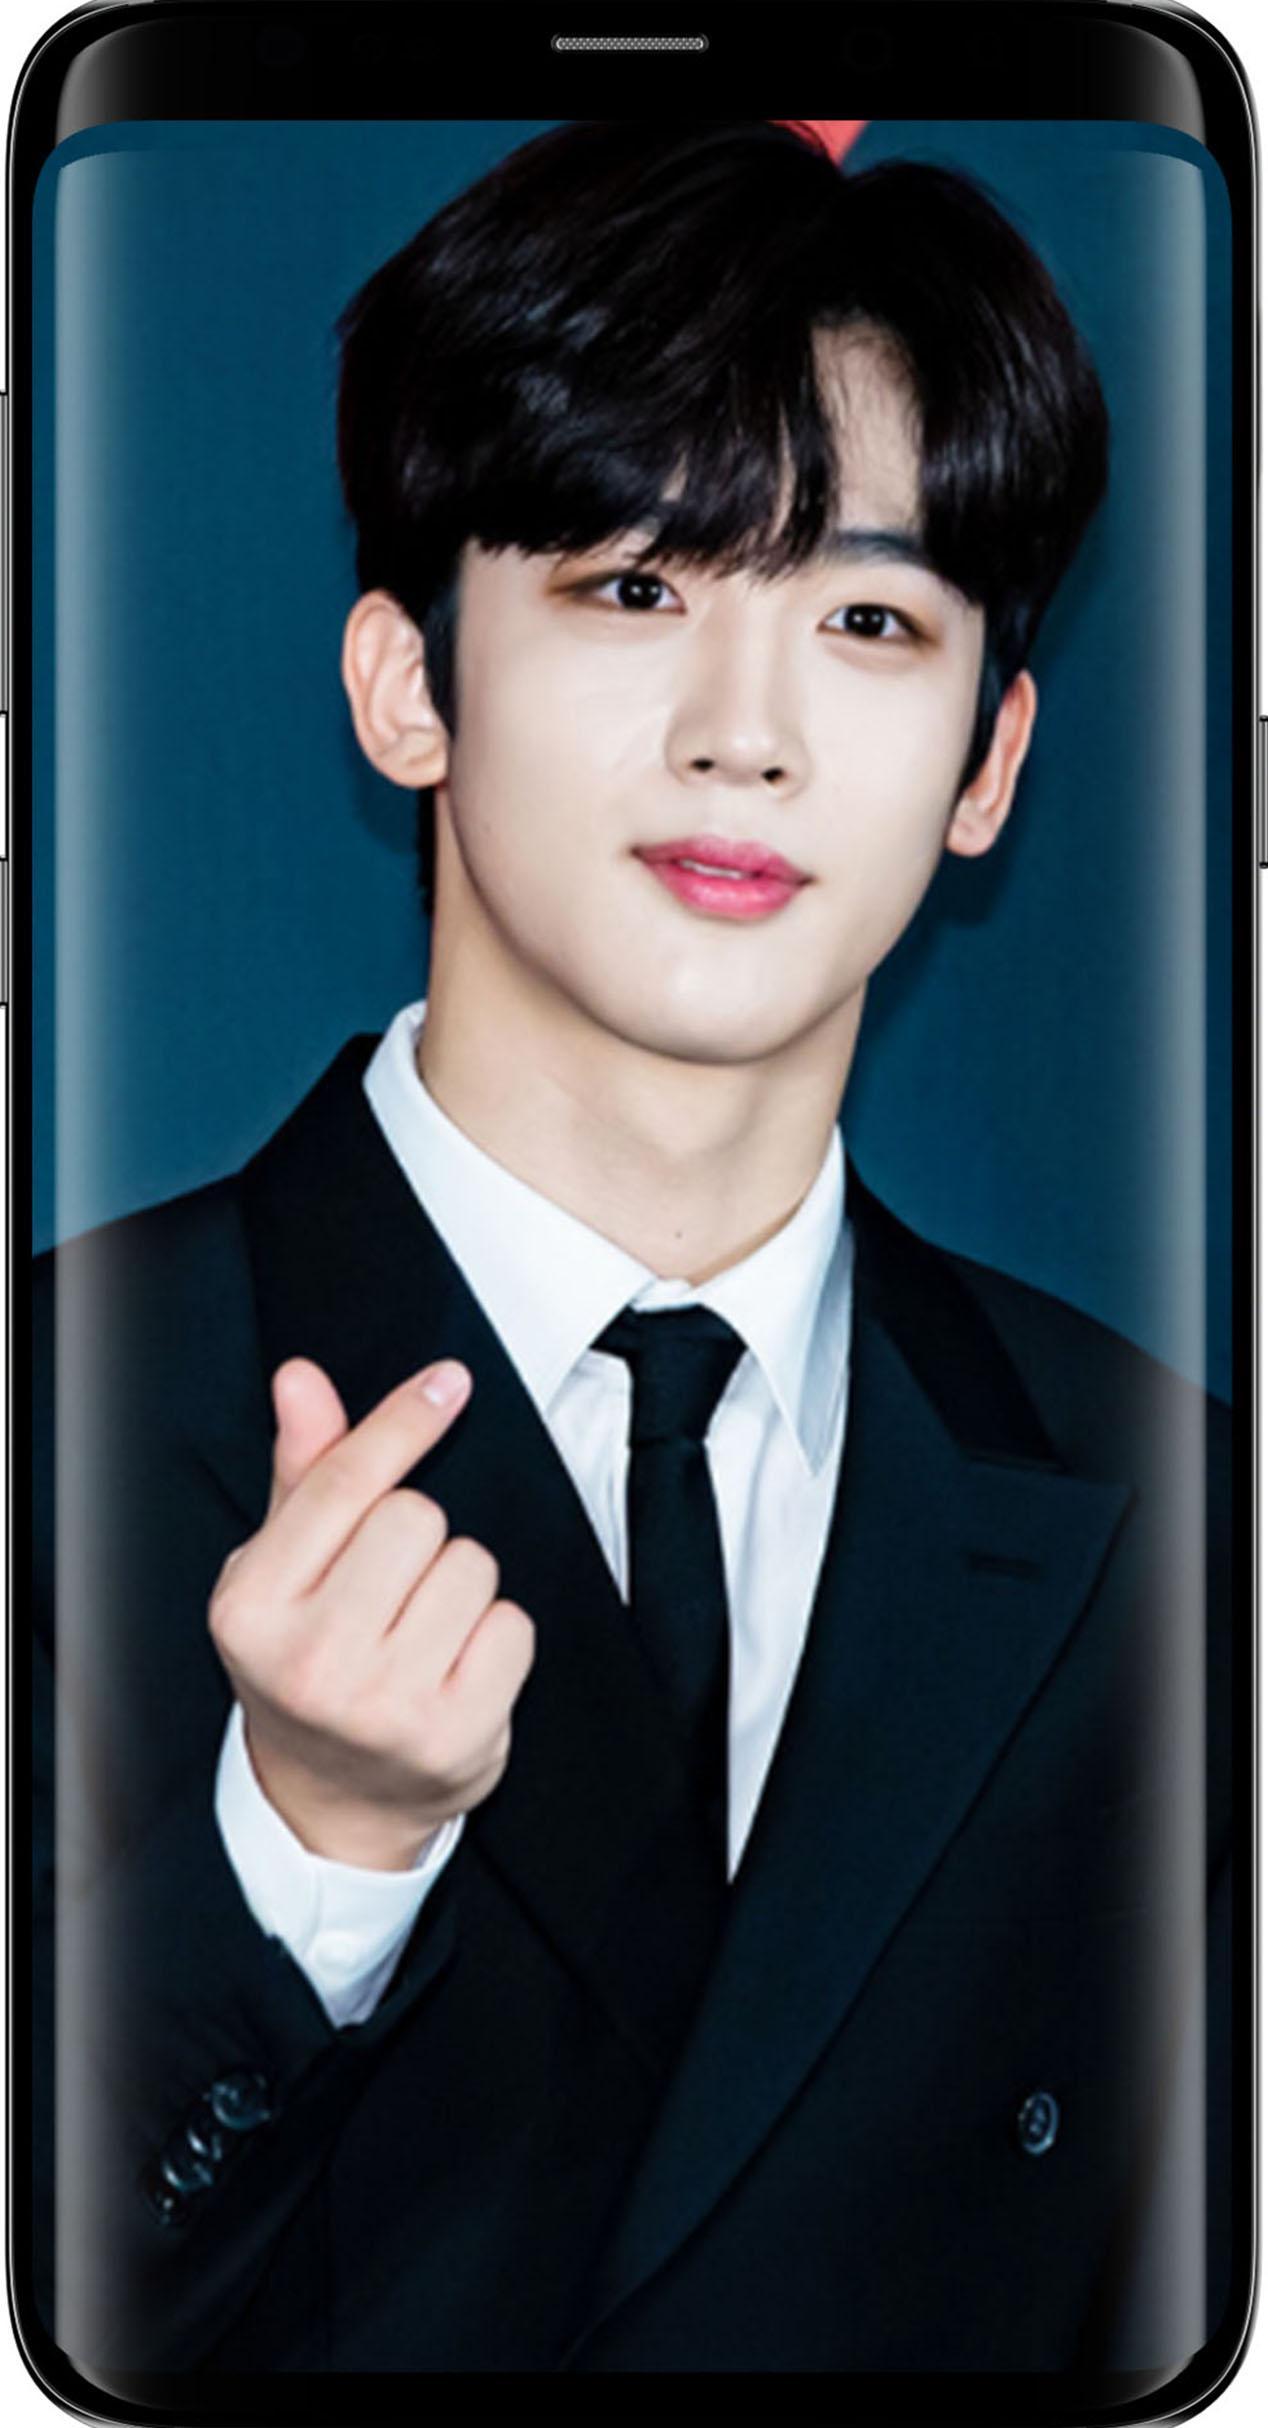 X1 Kim Yohan Wallpaper For Android Apk Download